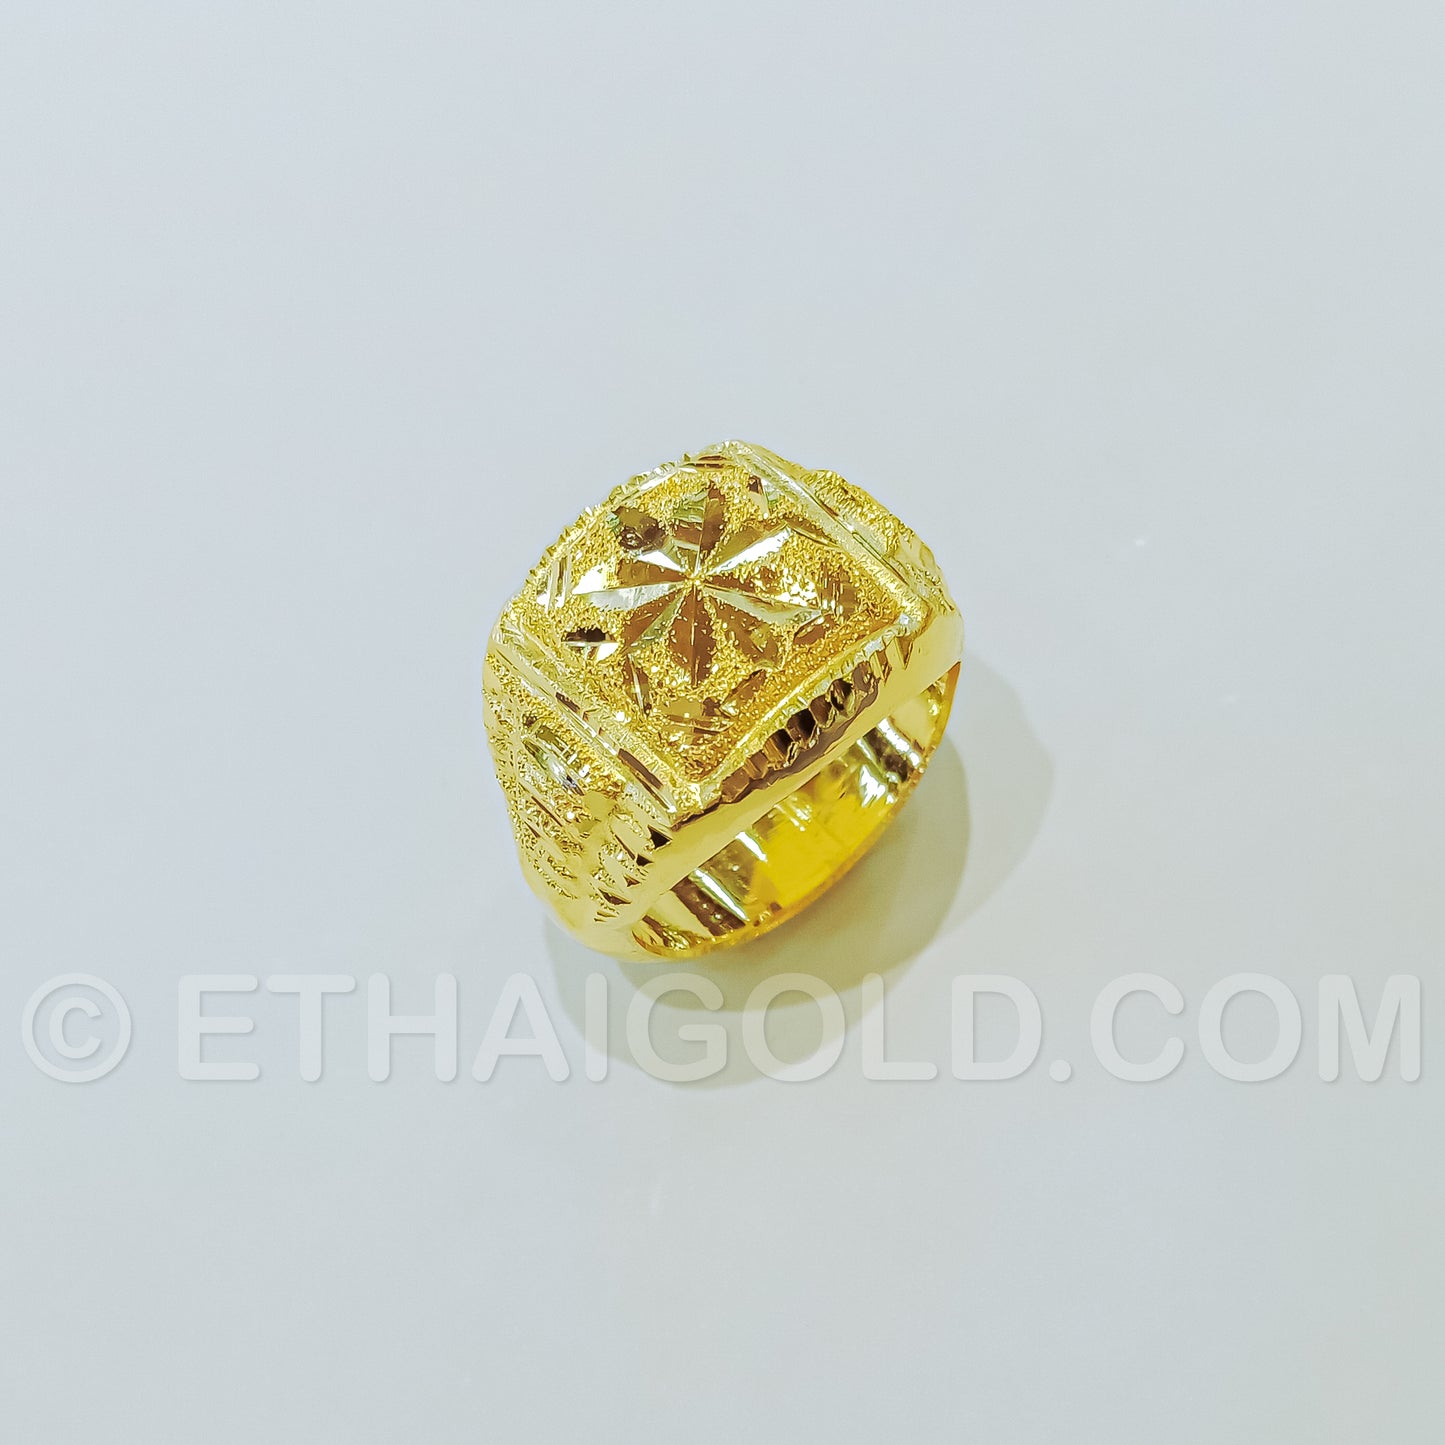 1/4 BAHT POLISHED SPARKLING DIAMOND-CUT HOLLOW SQUARE CLASSIC RING IN 23K GOLD (ID: R1001S)